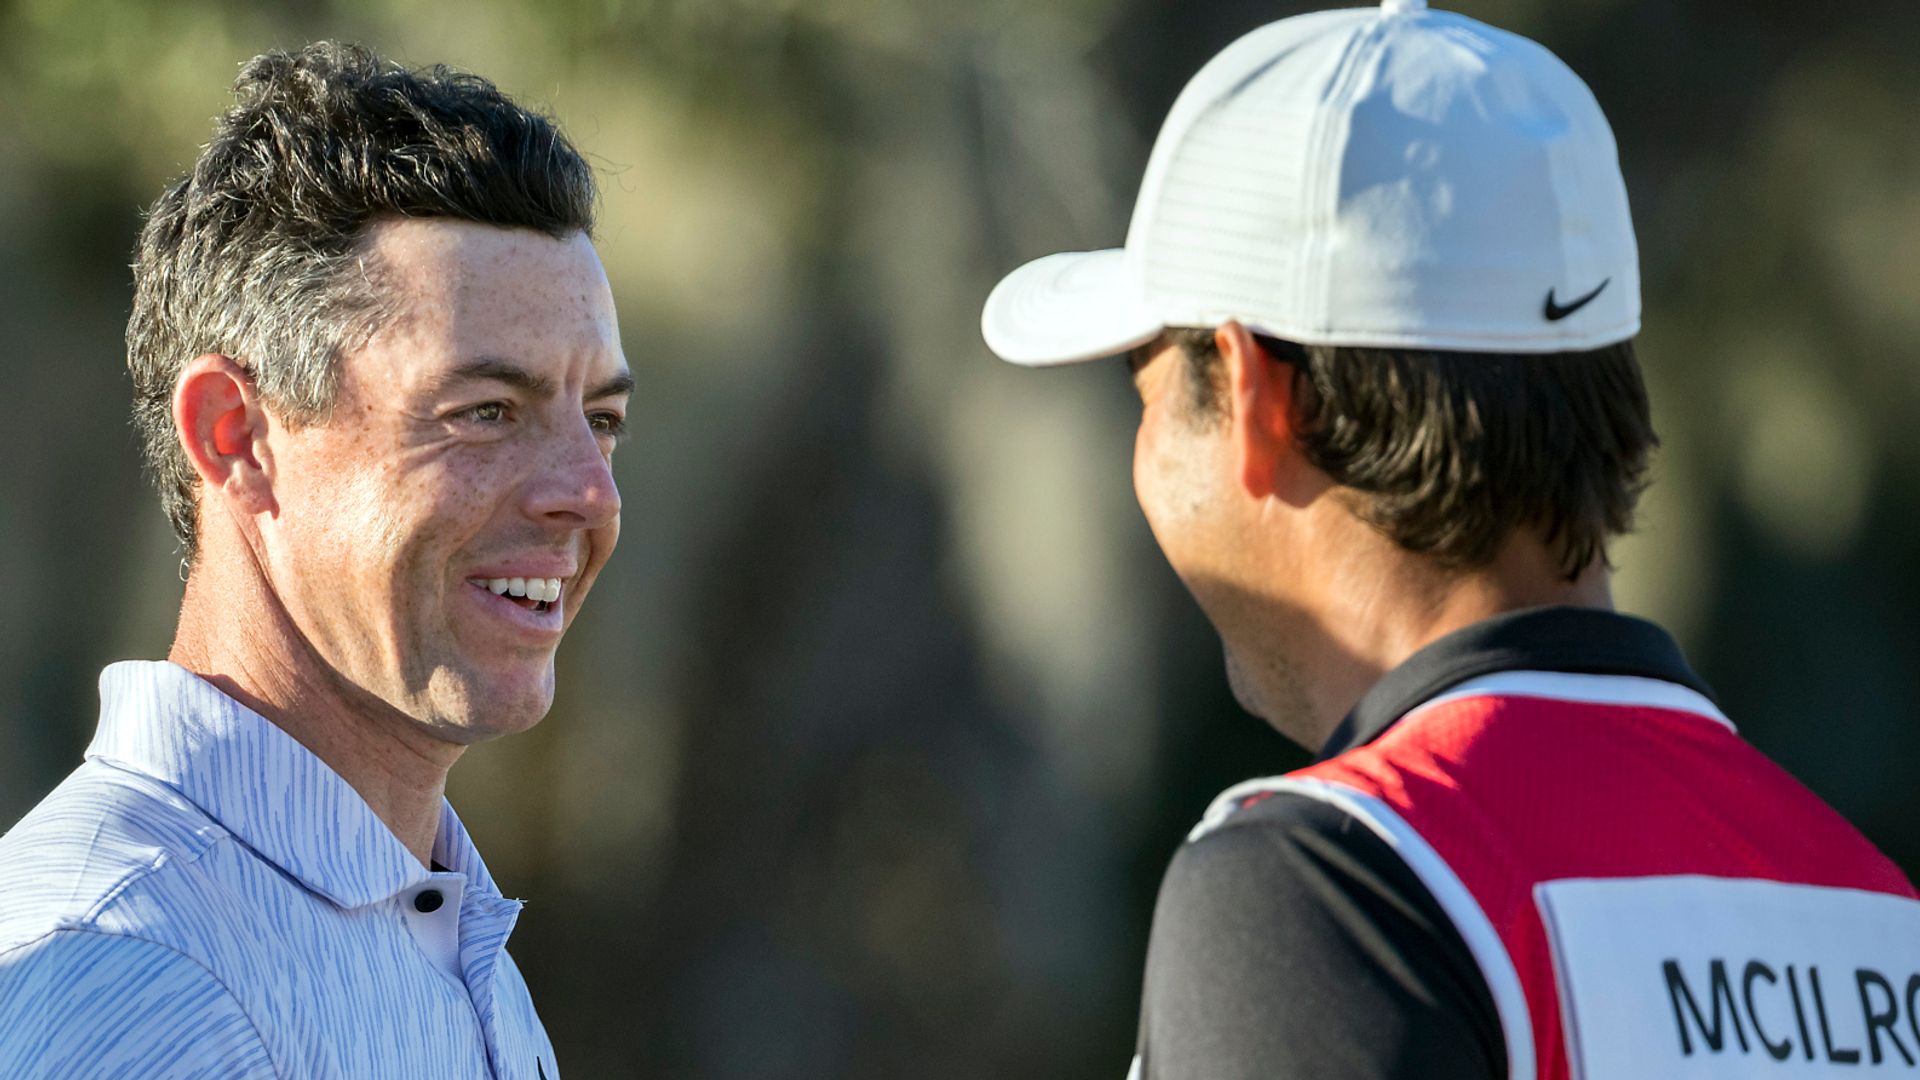 McIlroy's marvellous rise back to world No 1 | What will he achieve next?